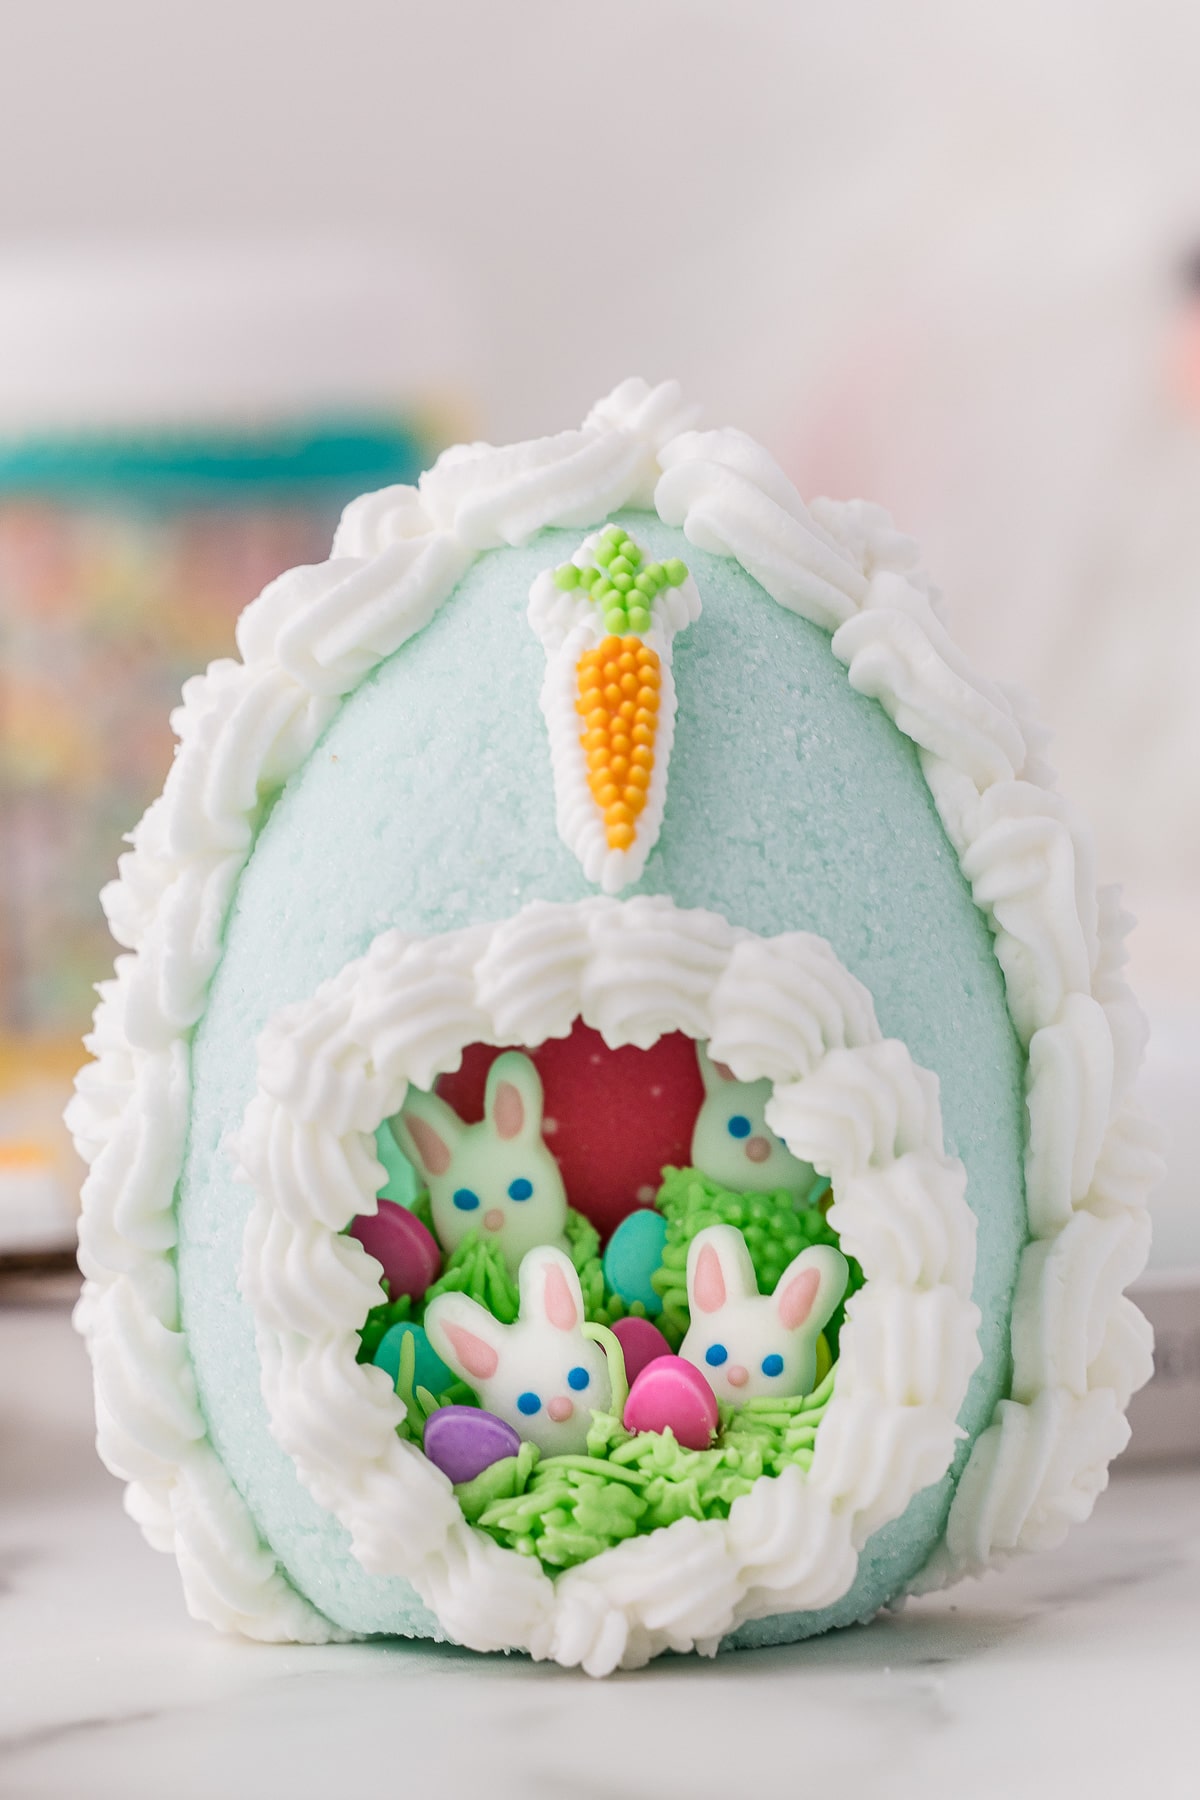 Close up of a Sugar Easter Egg with a cute panoramic peep hole showing 4 little candy bunnies inside